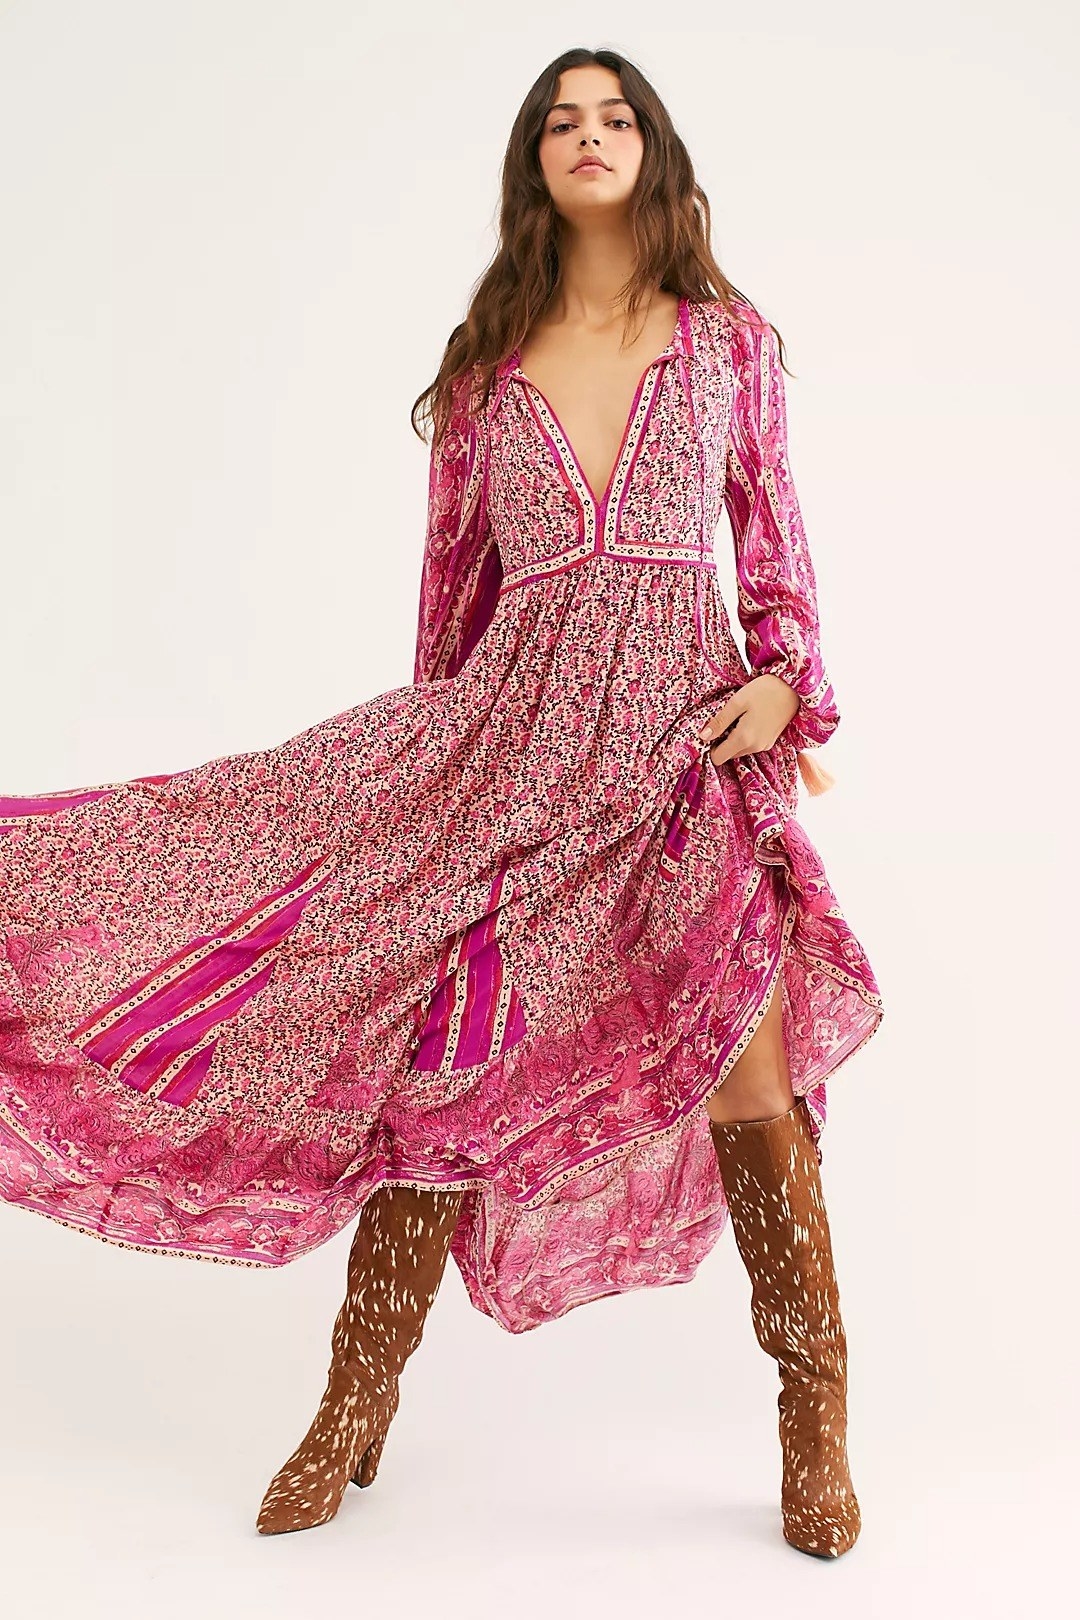 Model wearing printed hot pink maxi dress with deep V-neck